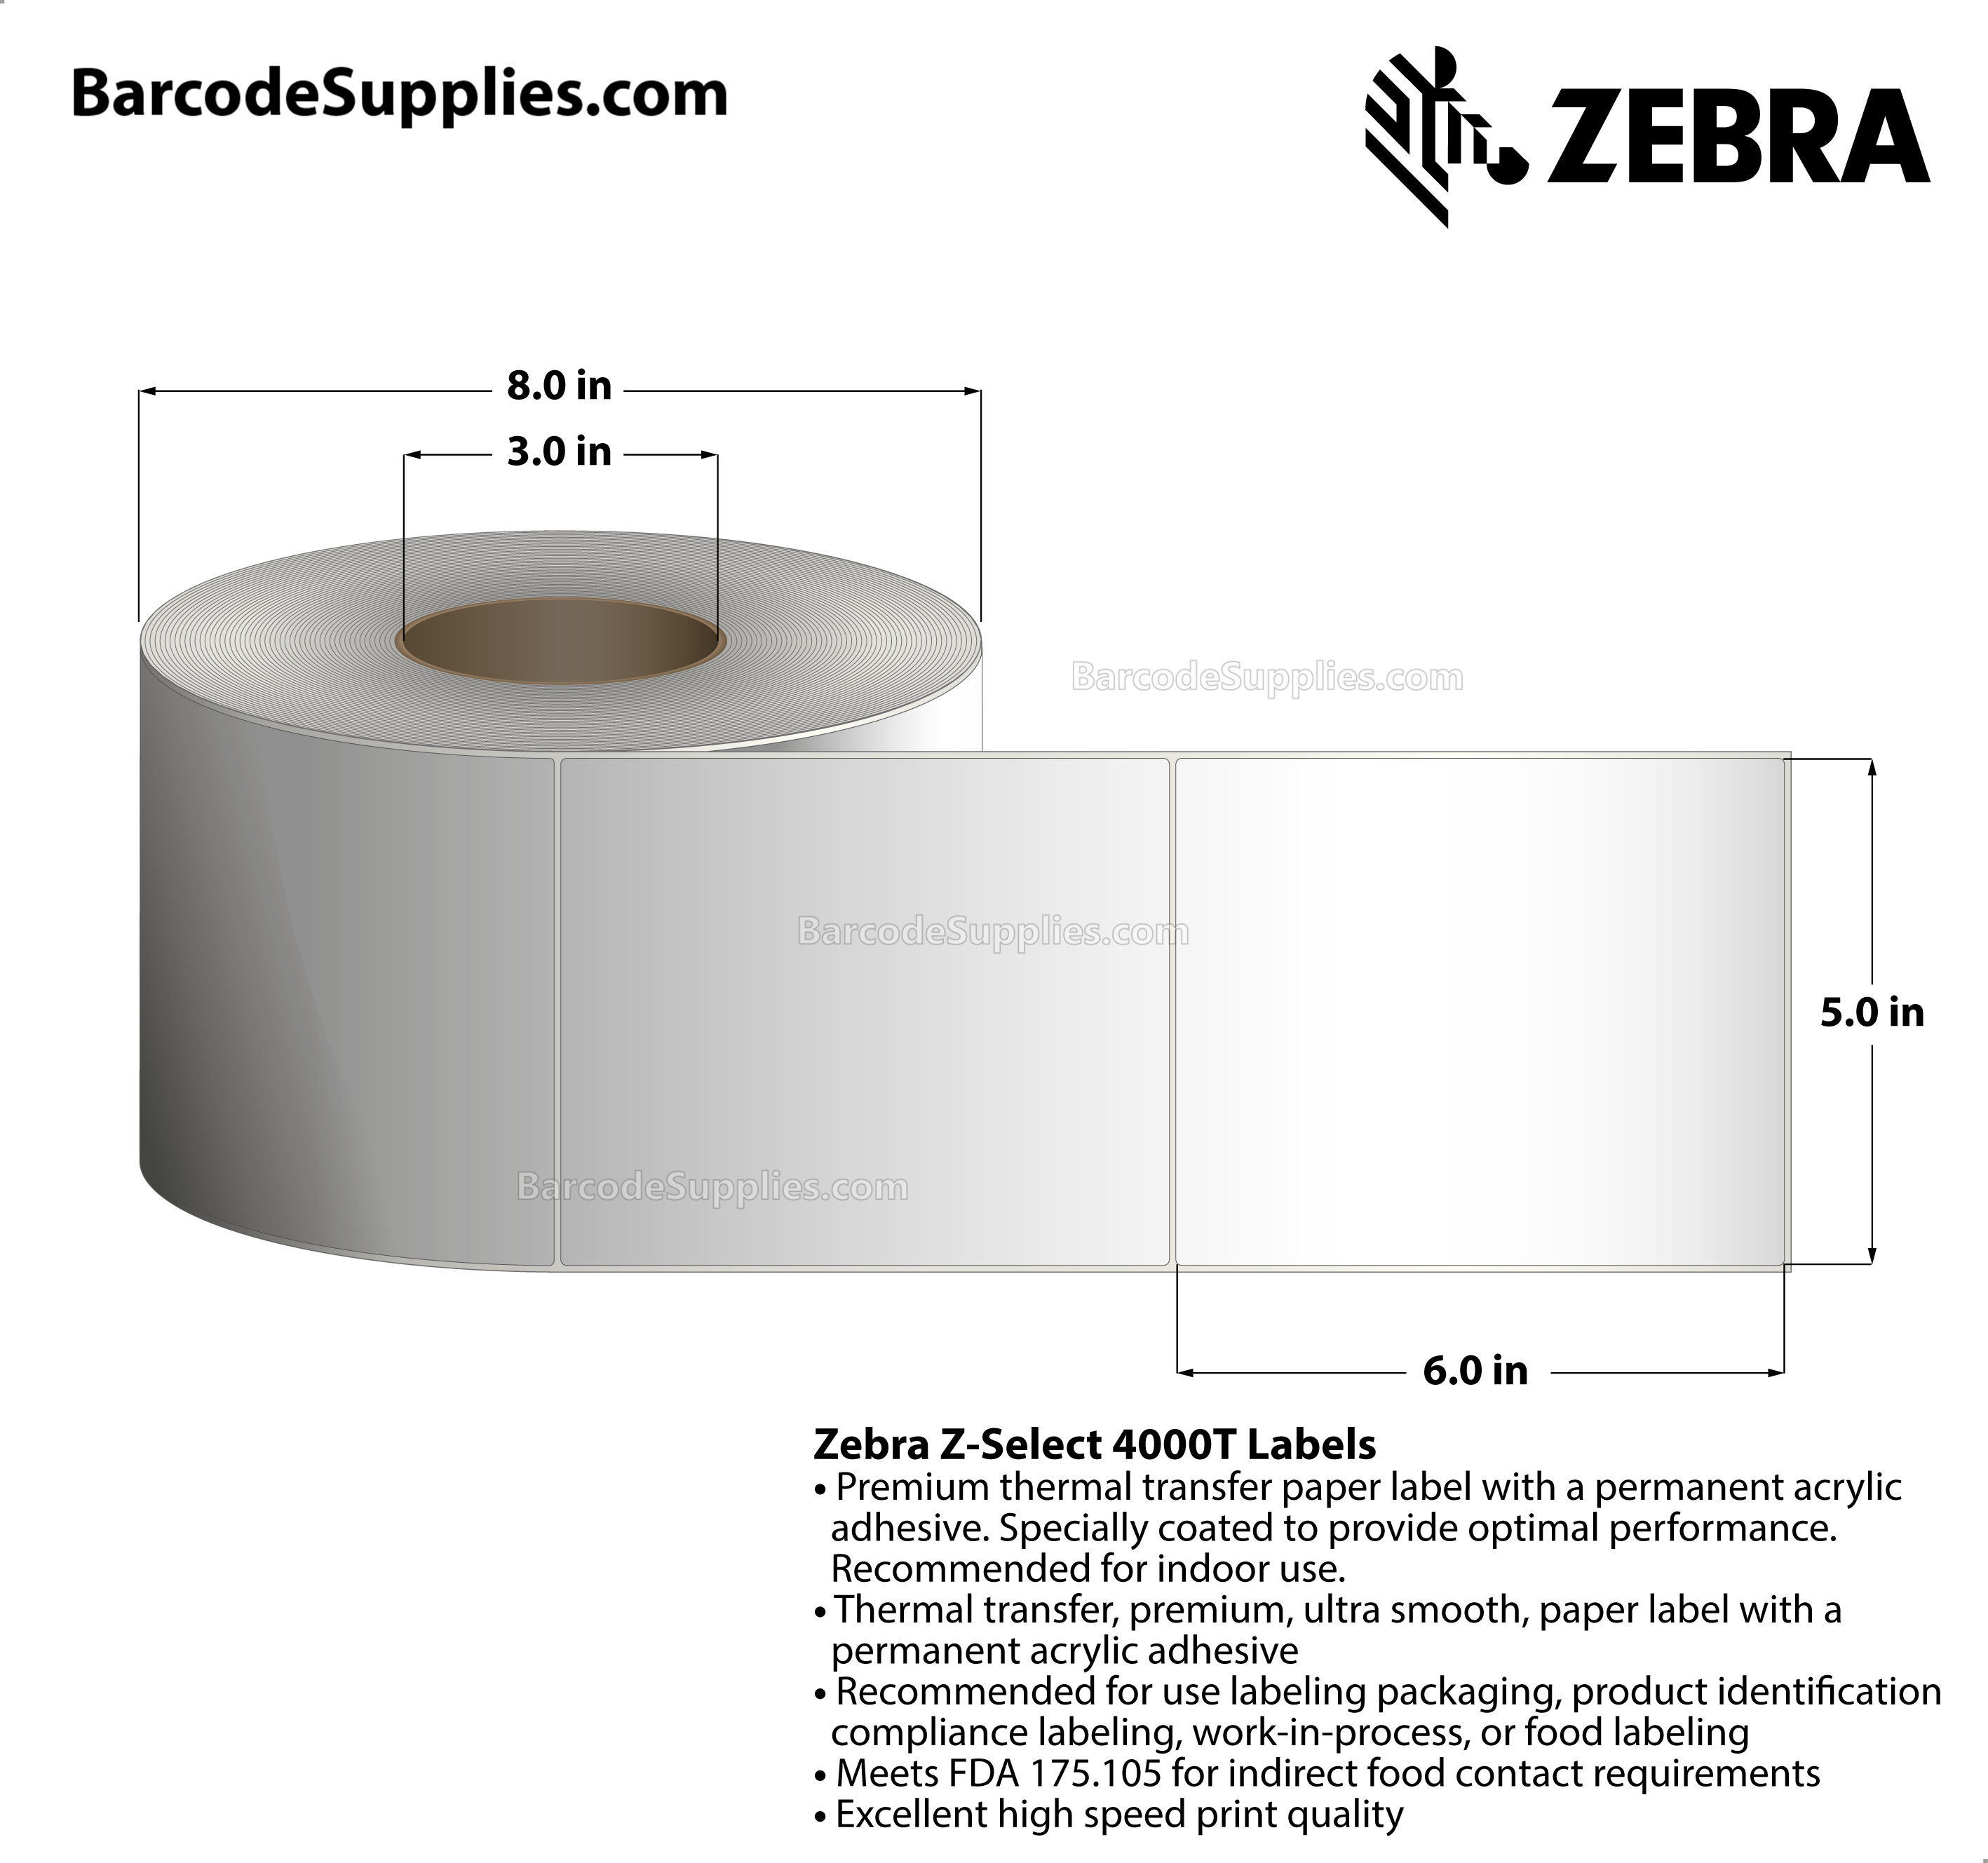 5 x 6 Thermal Transfer White Z-Select 4000T Labels With Permanent Adhesive - Not Perforated - 960 Labels Per Roll - Carton Of 4 Rolls - 3840 Labels Total - MPN: 72301